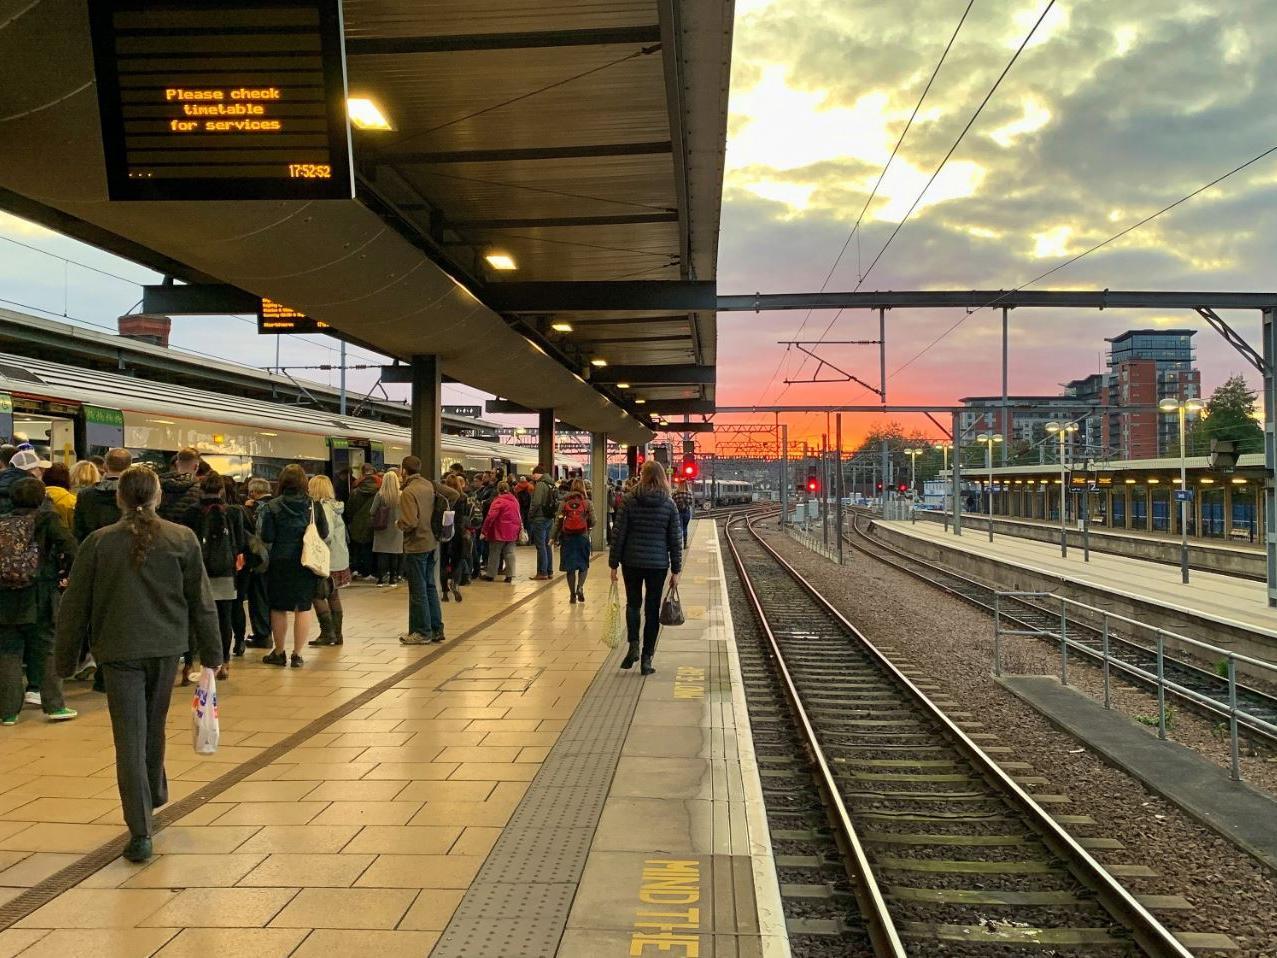 In October 2019, a Leeds City Council plans panel agreed to draft a letter to regional transport chiefs asking them to discuss the possibility of a station near Marsh Lane in the future.